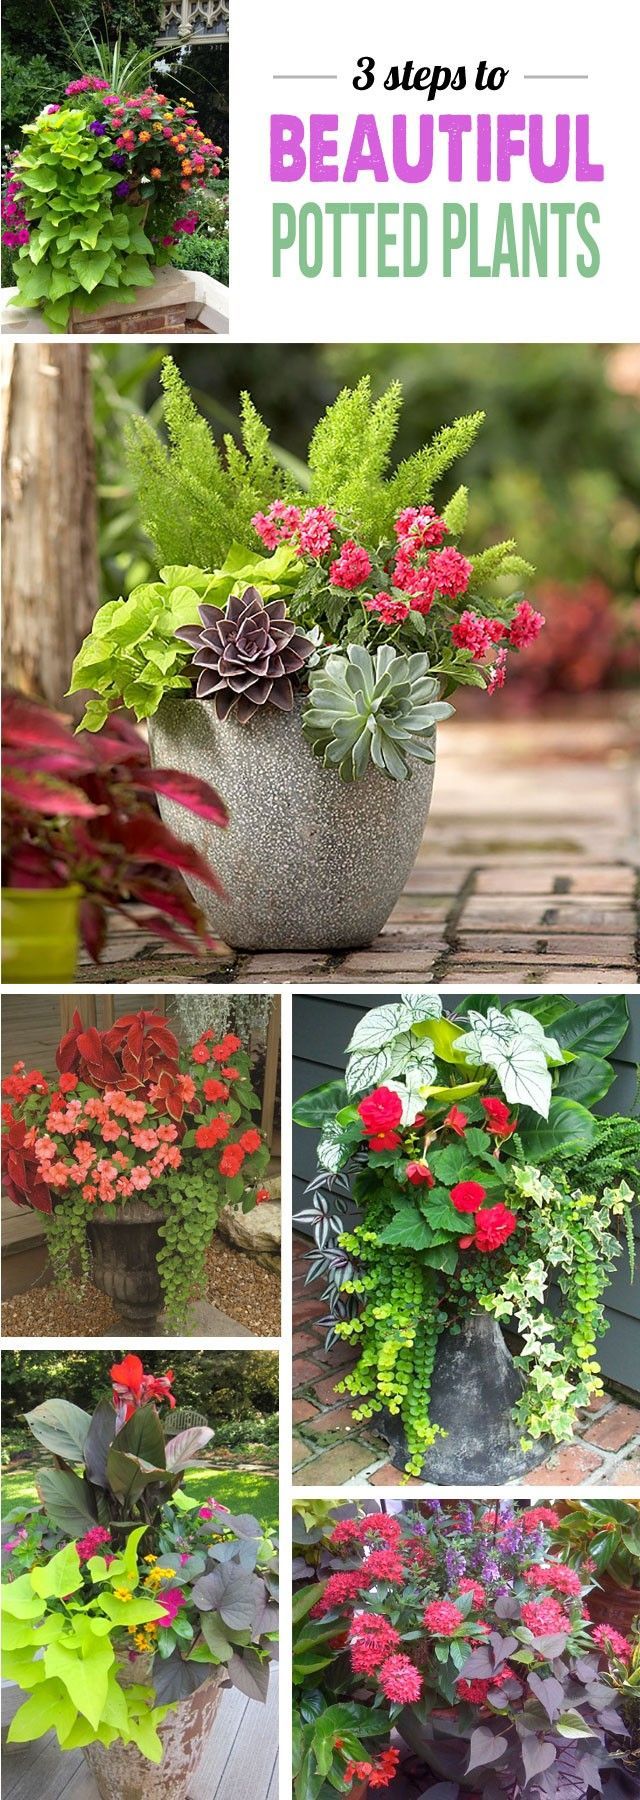 Great tips for making stunning potted plant arrangements – can’t wait to add some color to my deck!